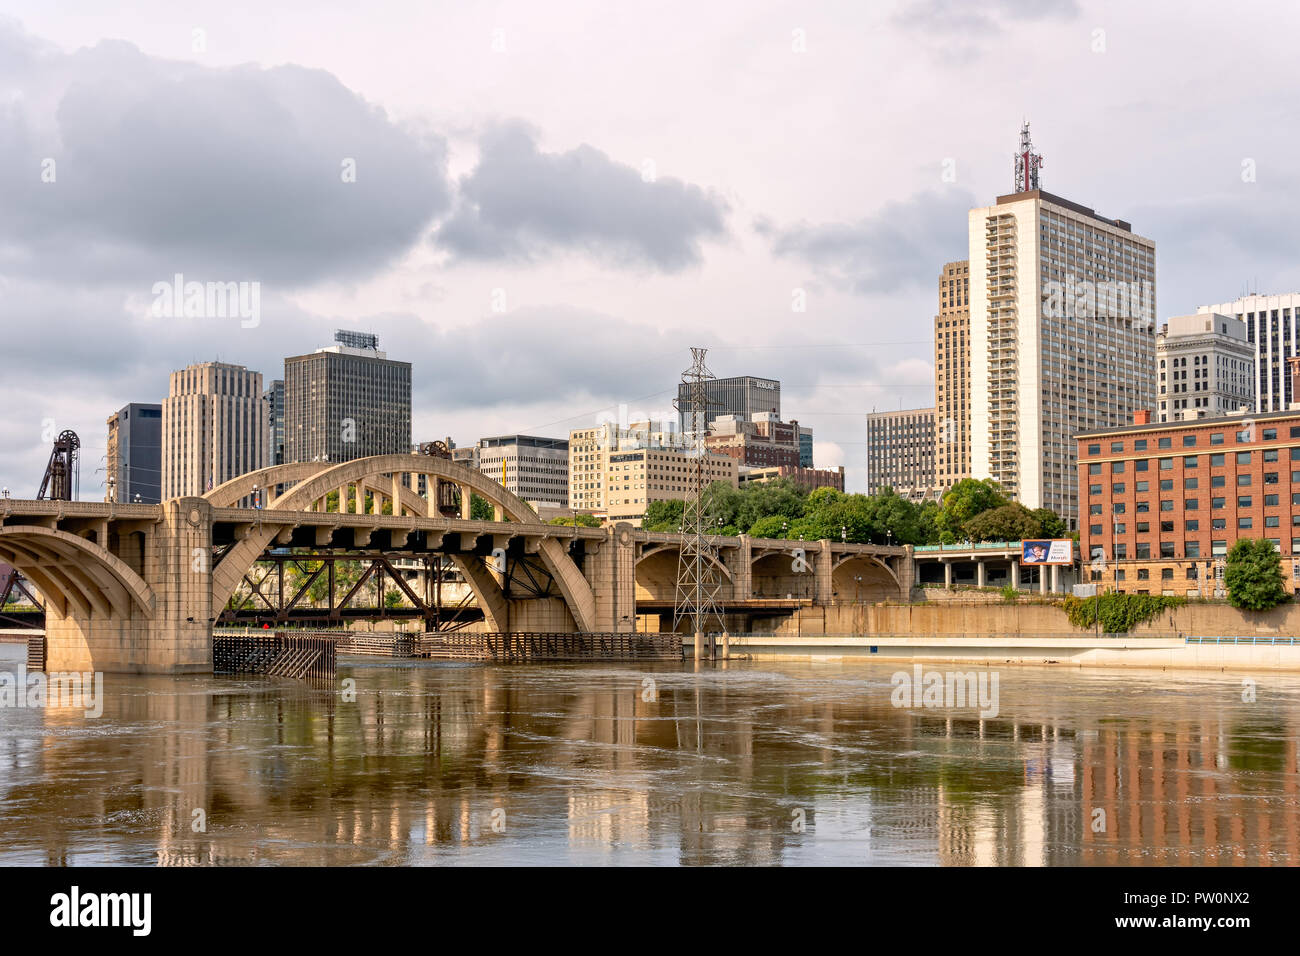 ST. PAUL, MN/USA - SEPTEMBER 30, 2018: The downtown St. Paul skyline in early morning featuring the Lafayette Bridge and Mississippi River. Stock Photo